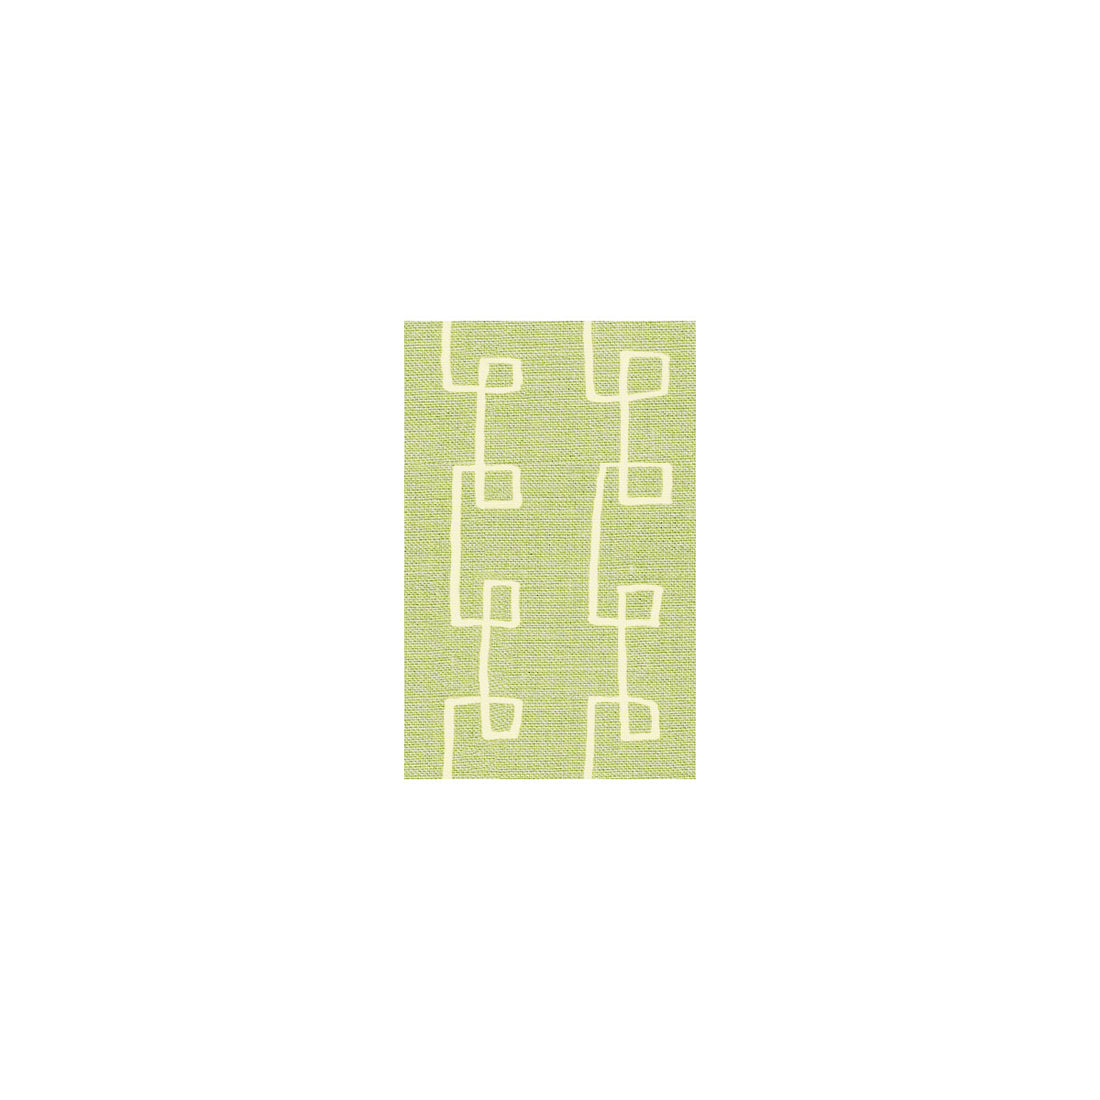 Griffin fabric in green/natural color - pattern BFC-3527.23.0 - by Lee Jofa in the Blithfield collection